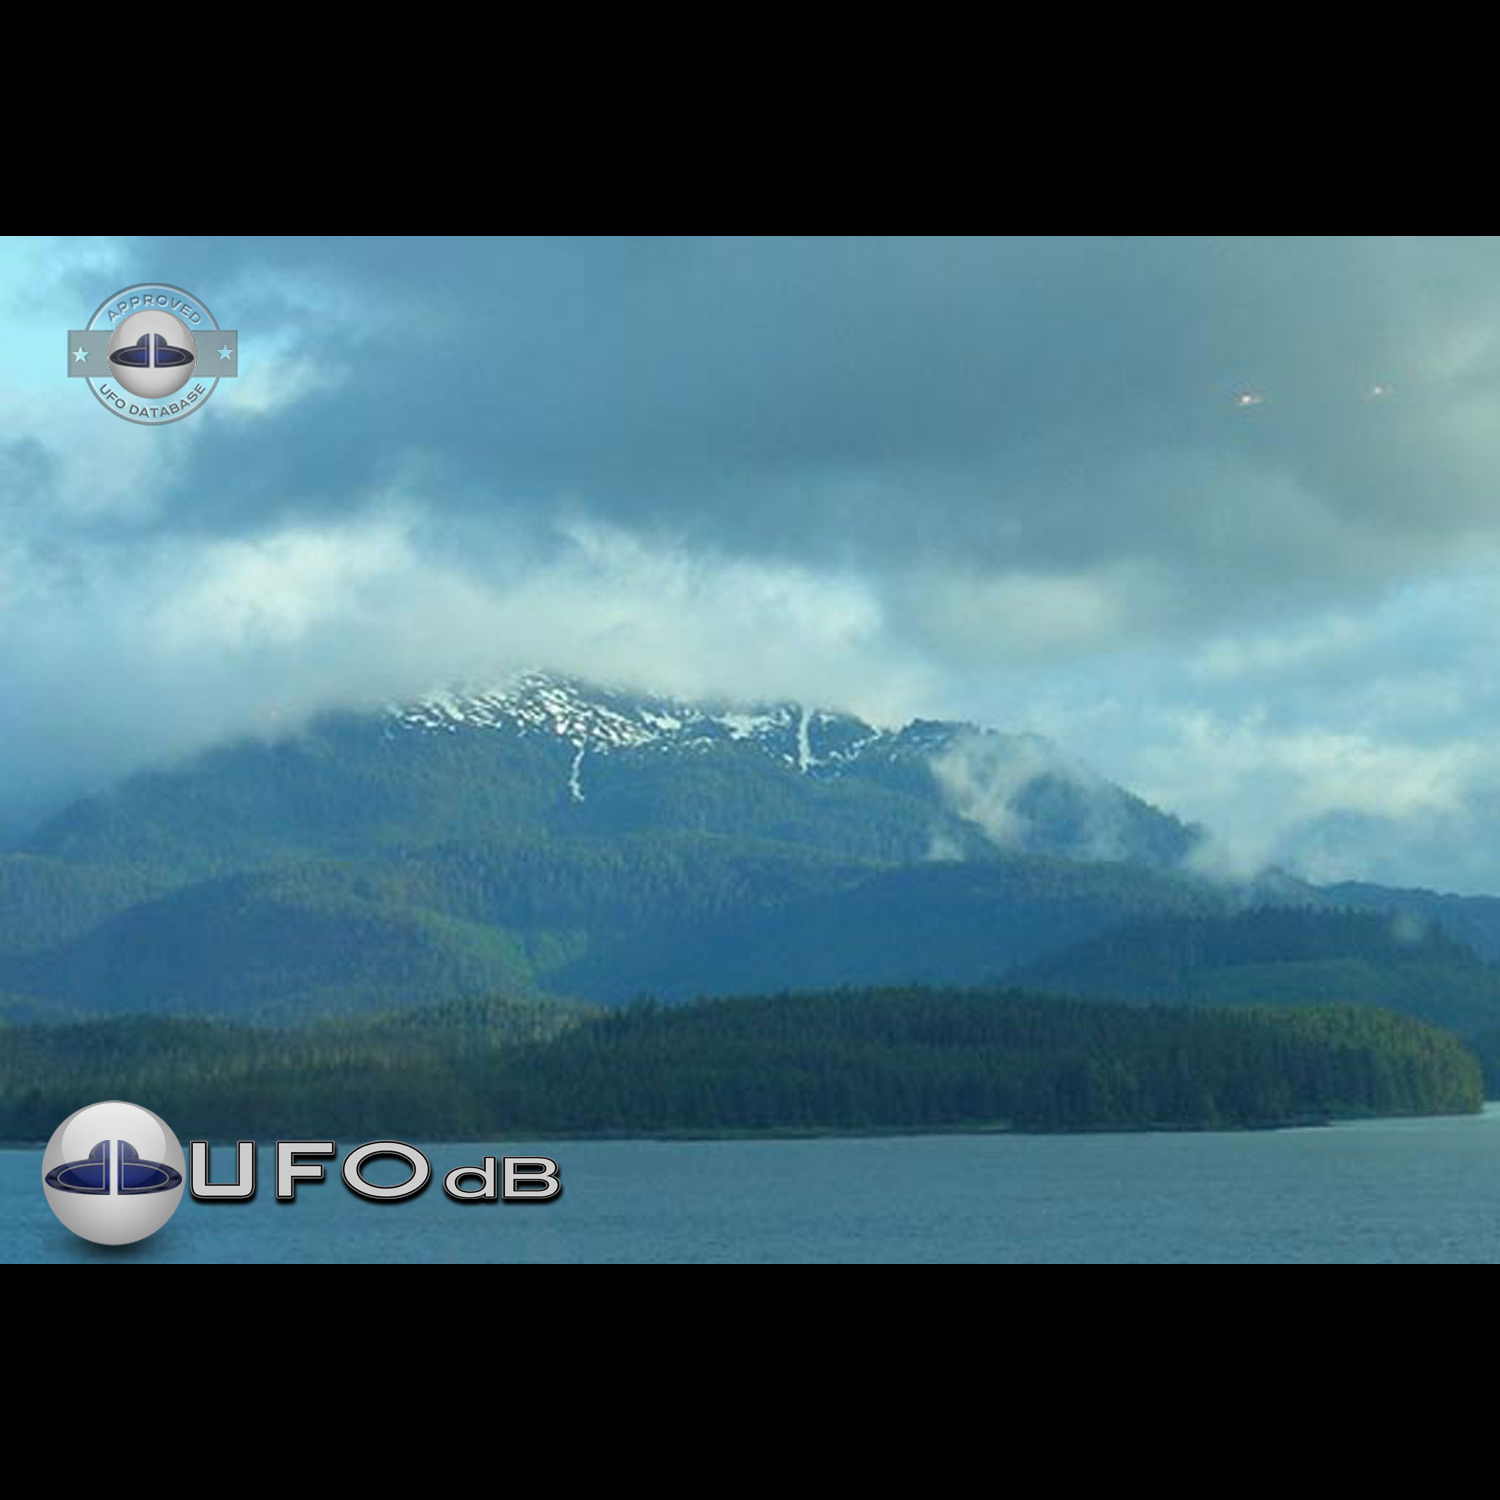 UFO Picture shot on boat on a Princess Cruise to Alaska - June 2006 UFO Picture #95-1